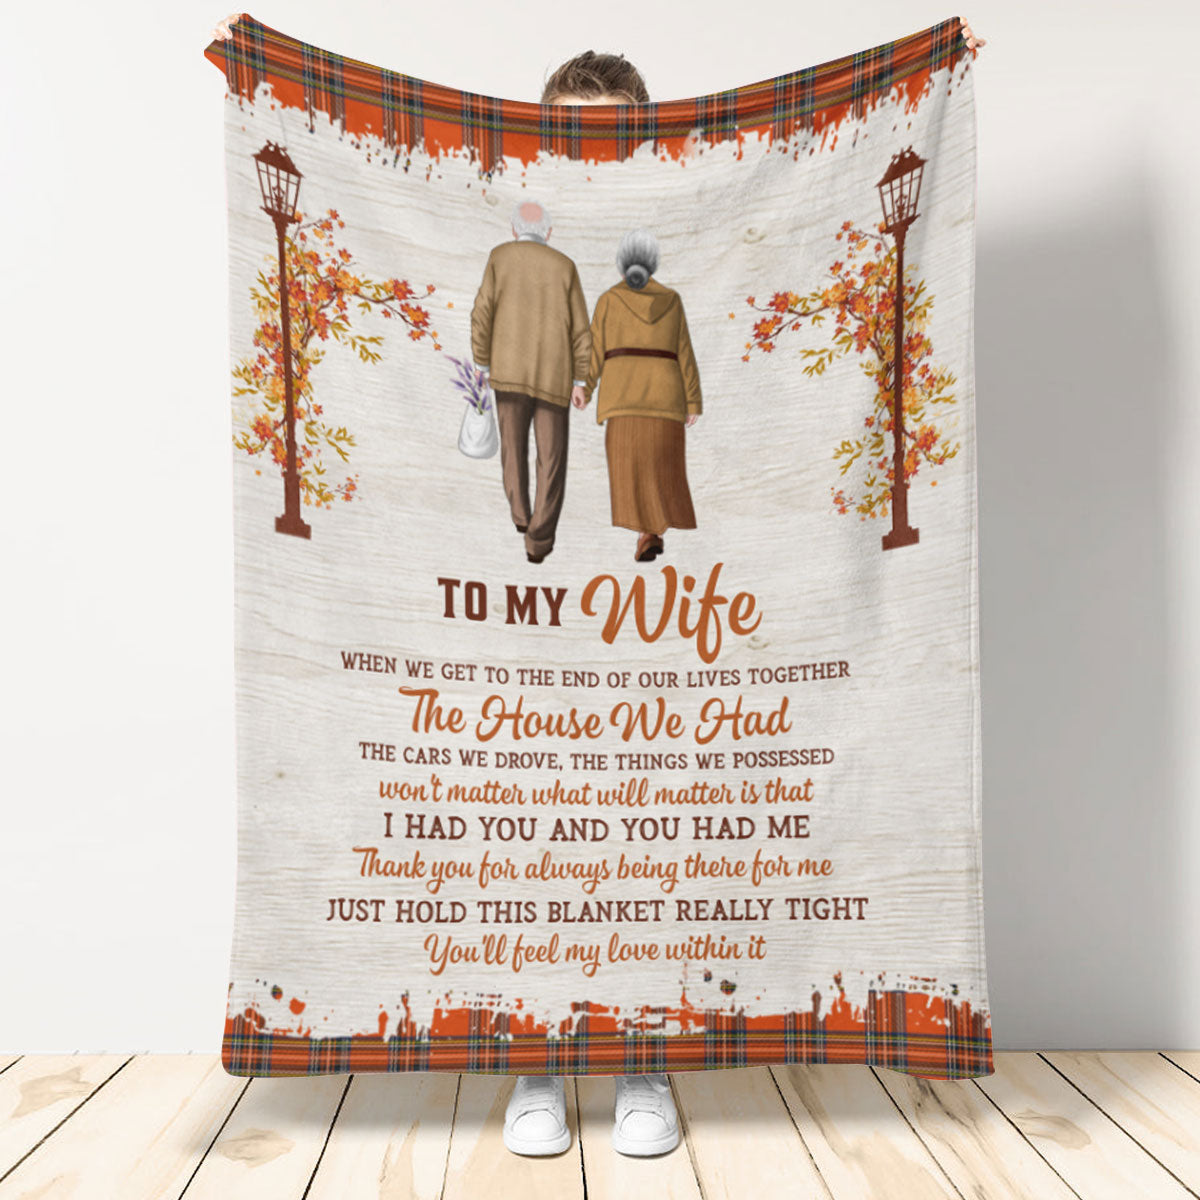 To My Wife When We Get To The End Of Our Lives Together Blanket Gift For Wife Anniversary Gift From Husband